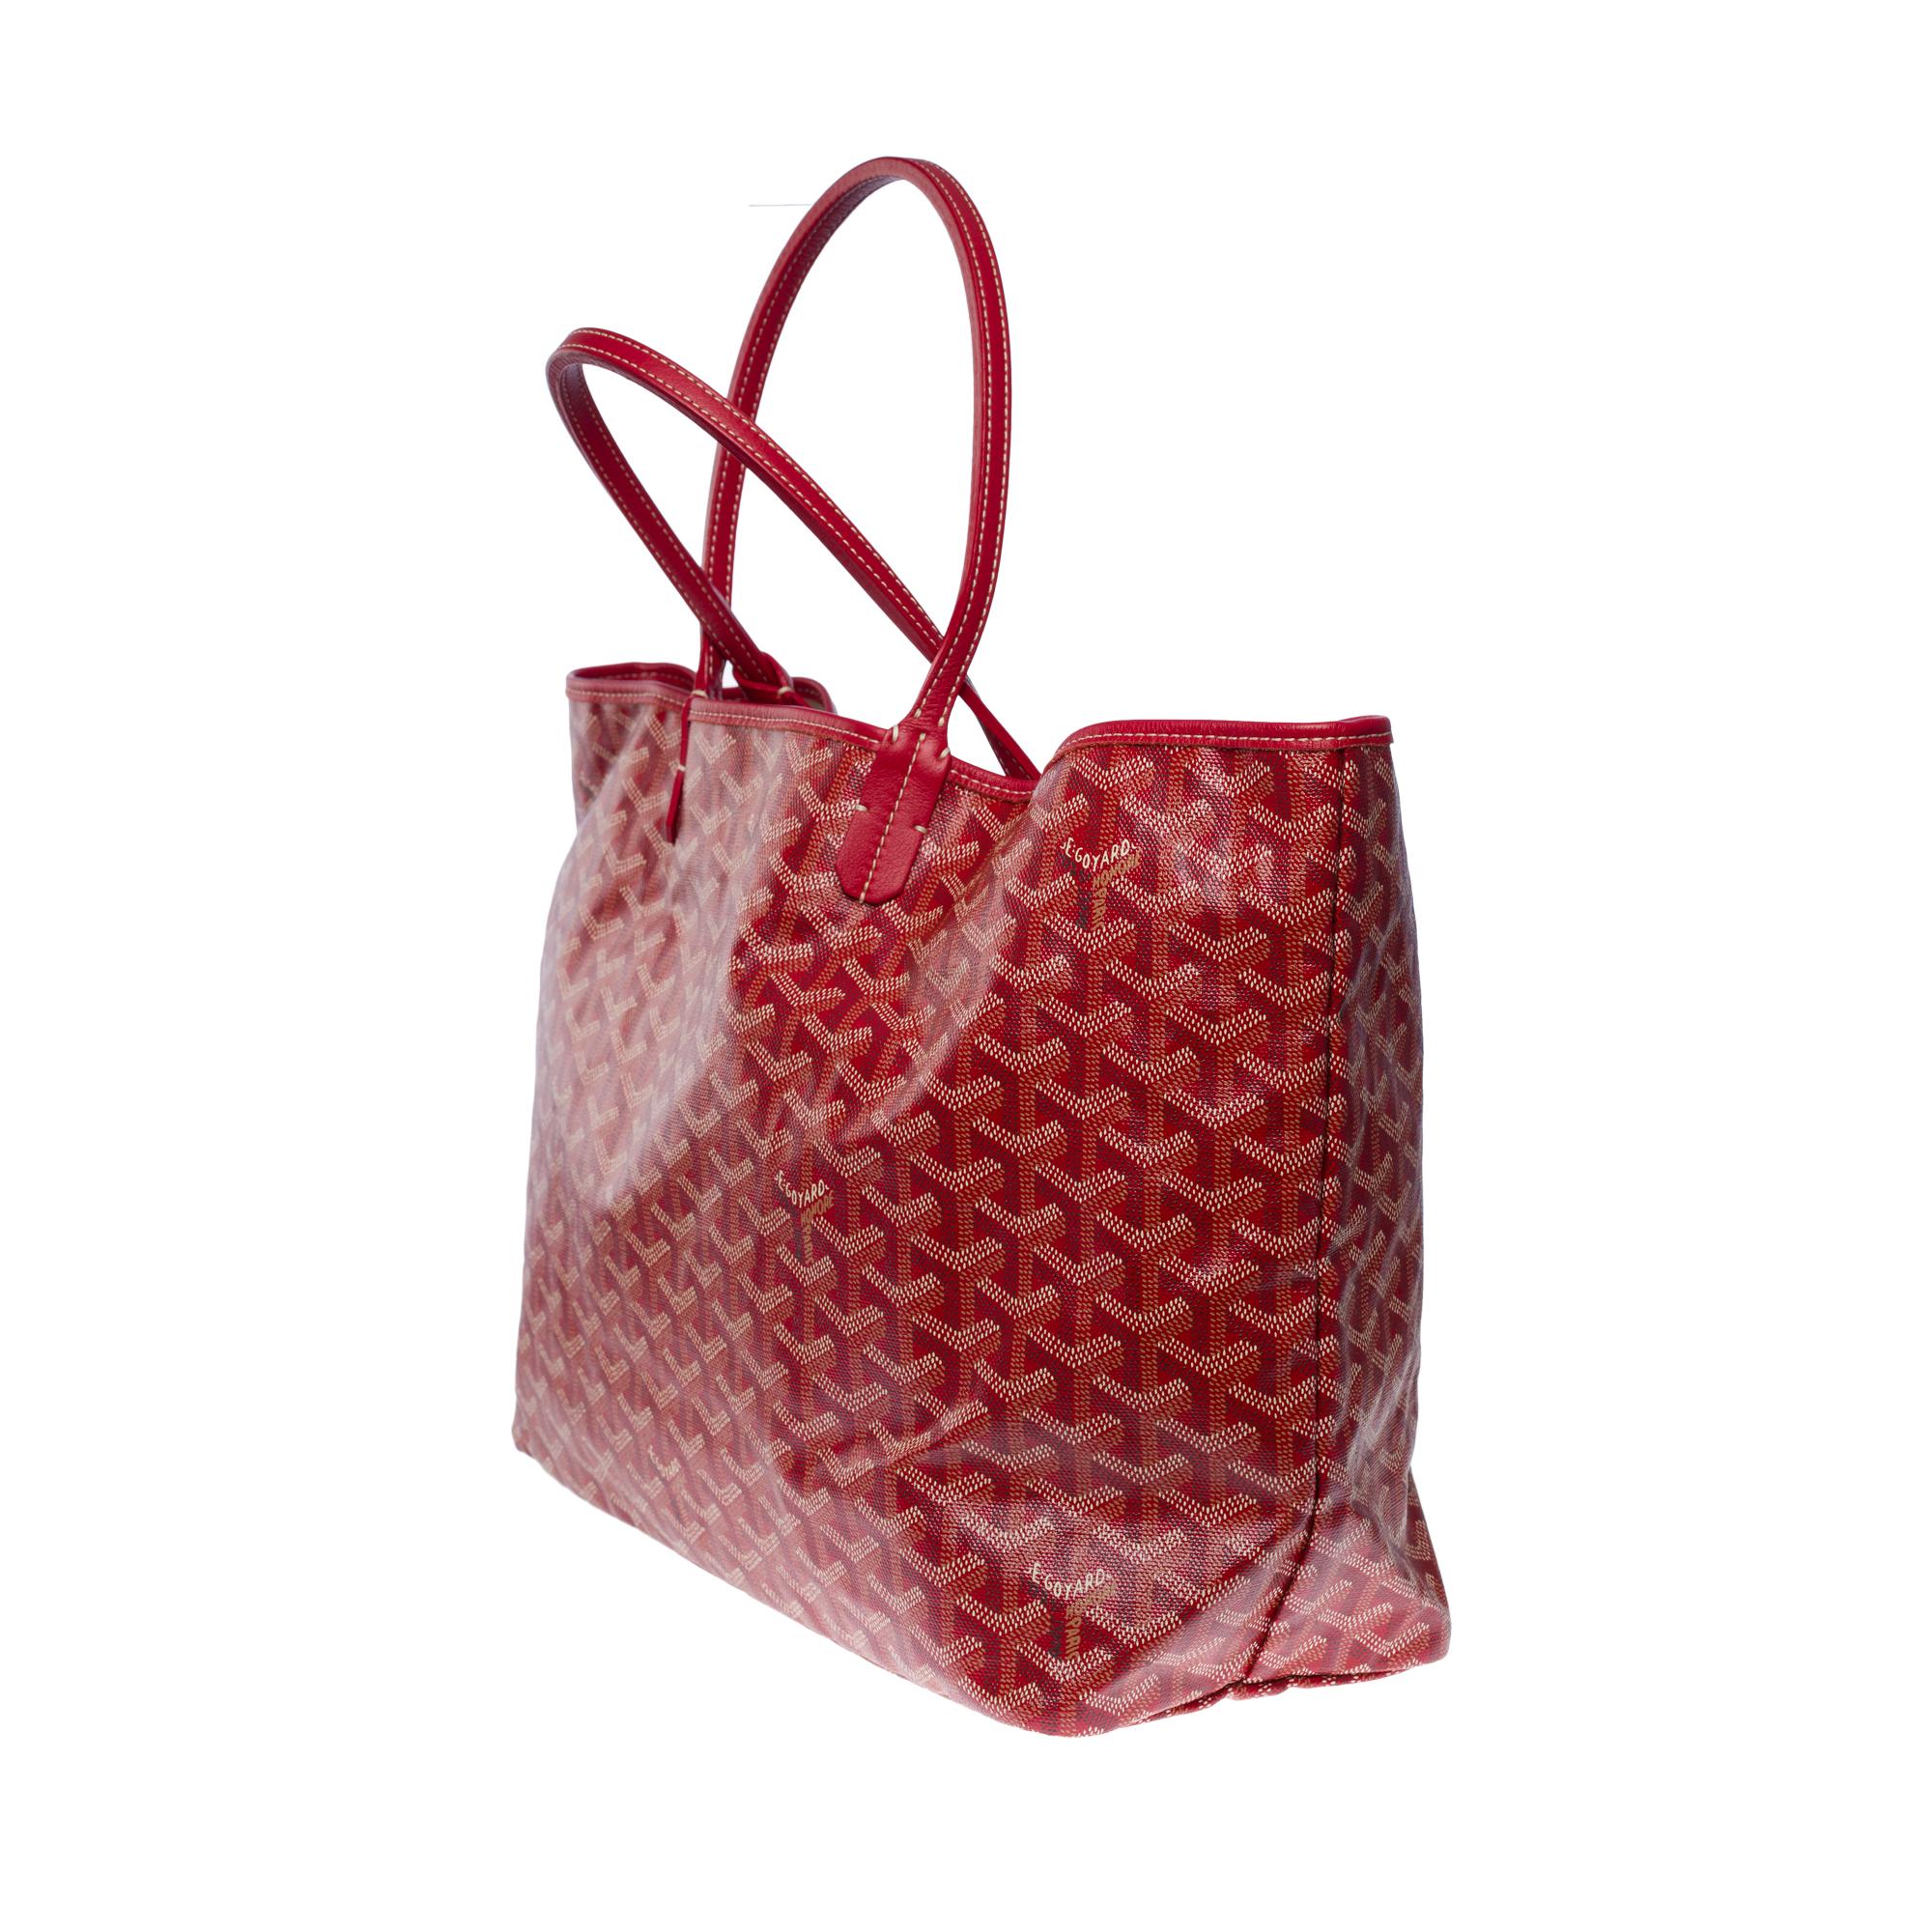 Women's The Coveted Goyard Saint-Louis PM Tote bag in Red canvas and leather, SHW